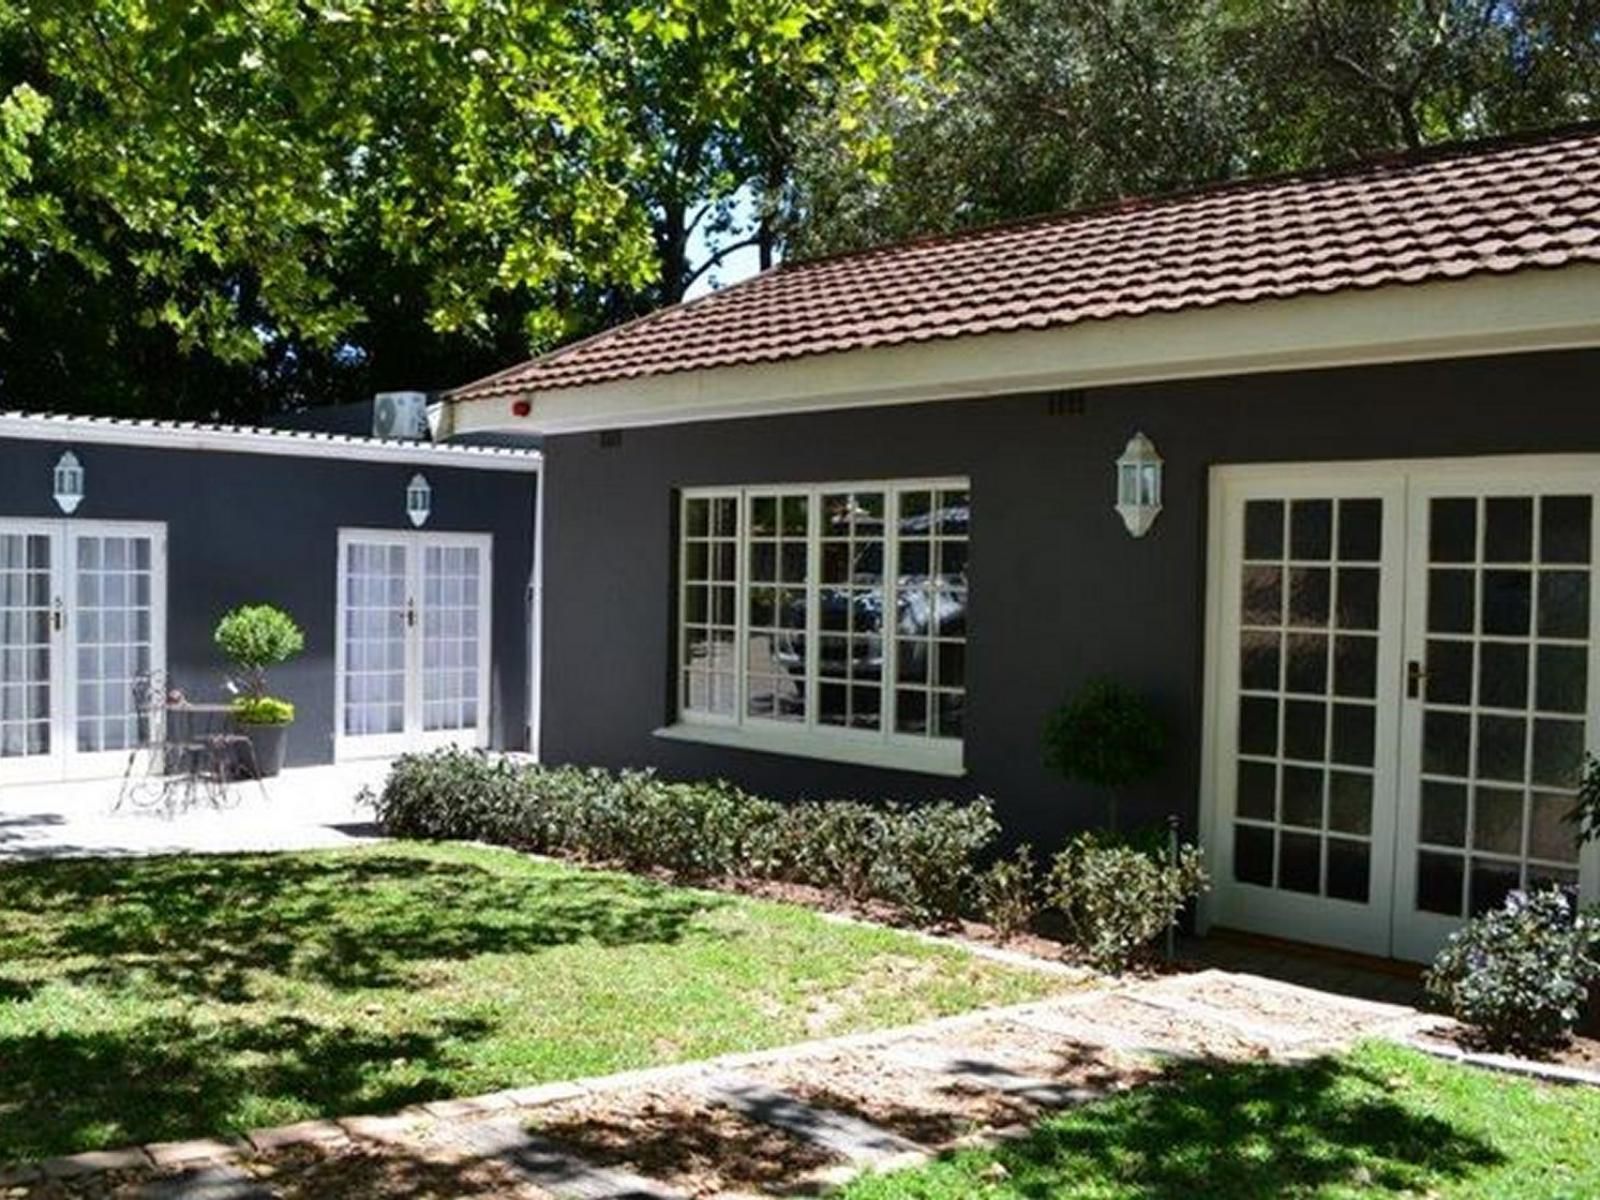 The Garden Shed Wellington Western Cape South Africa House, Building, Architecture